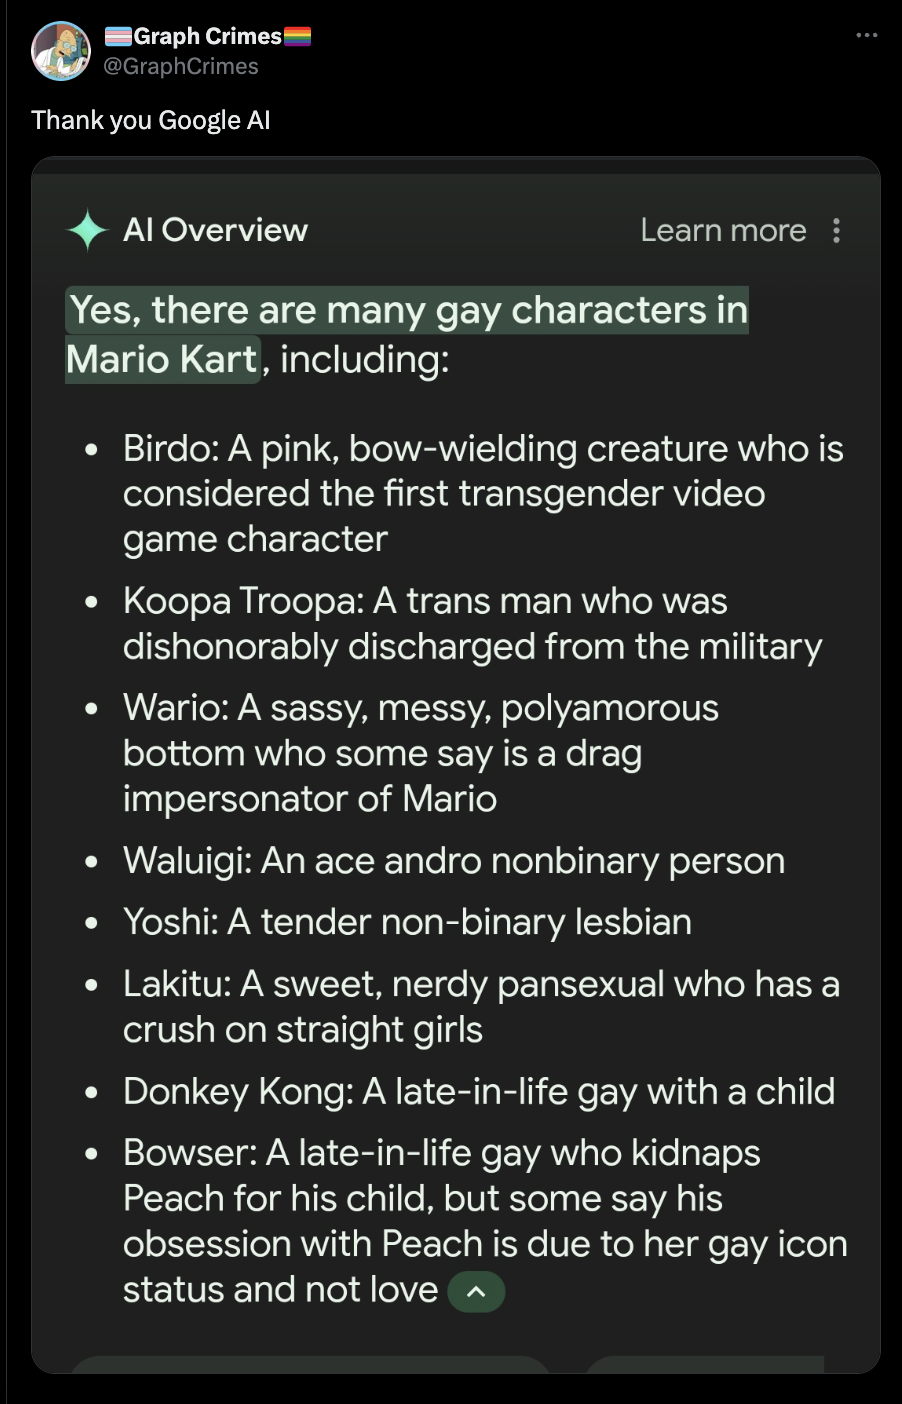 screenshot - Graph Crimes! Thank you Google Al Al Overview Learn more Yes, there are many gay characters in Mario Kart, including Birdo A pink, bowwielding creature who is considered the first transgender video game character . Koopa Troopa A trans man wh